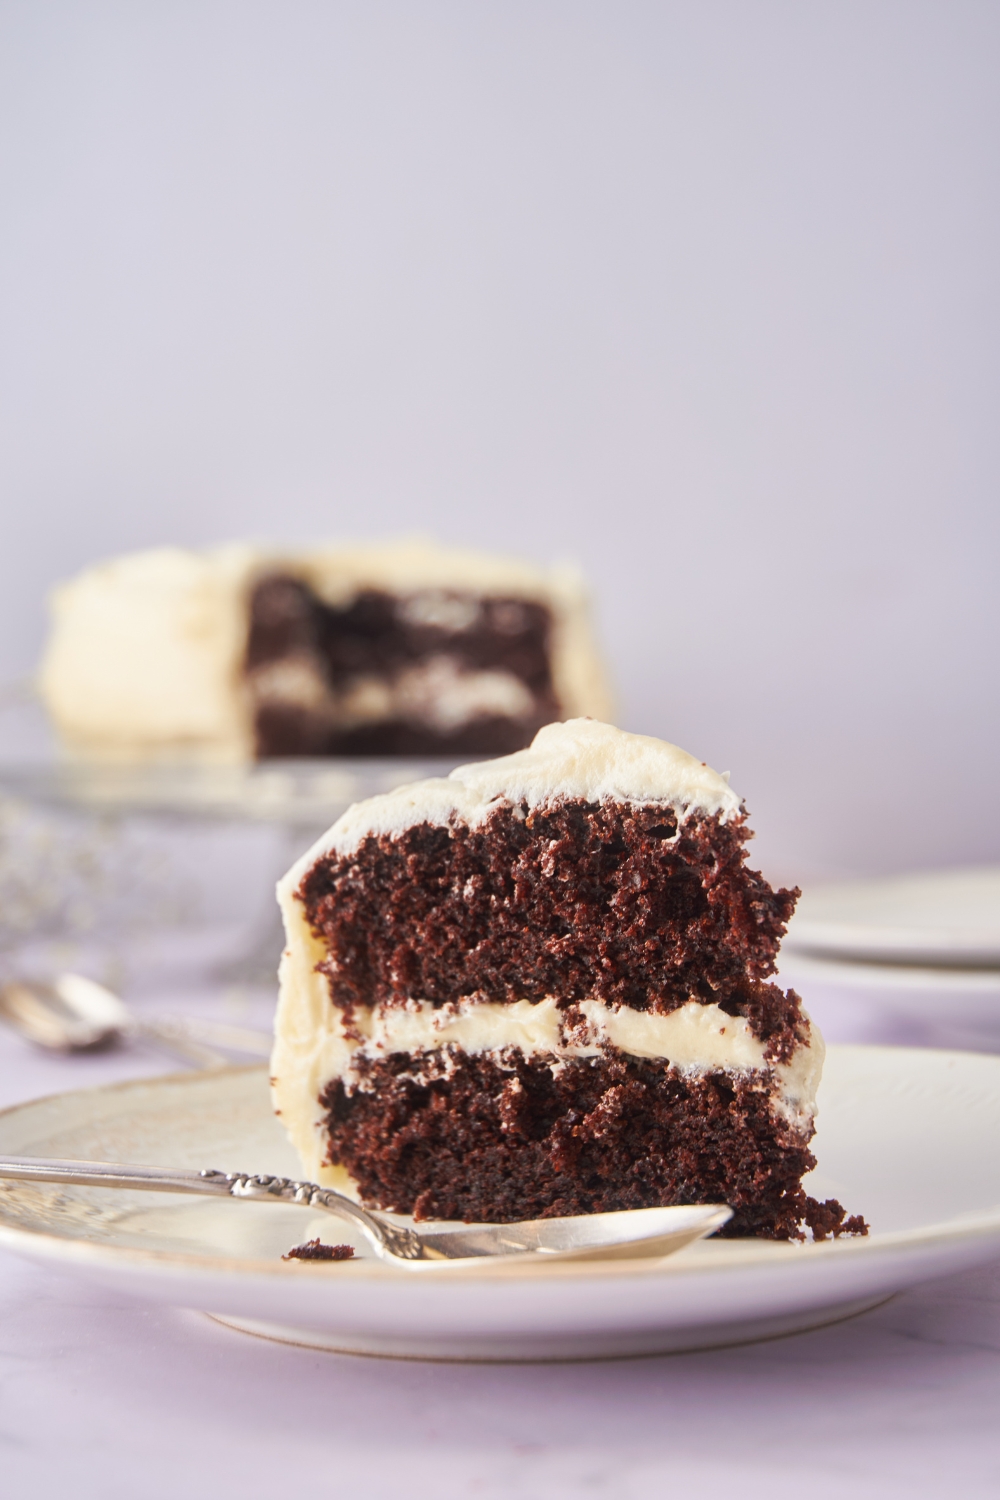 A slice of chocolate cake layered with cream cheese frosting on a plate with a spoon next to it.